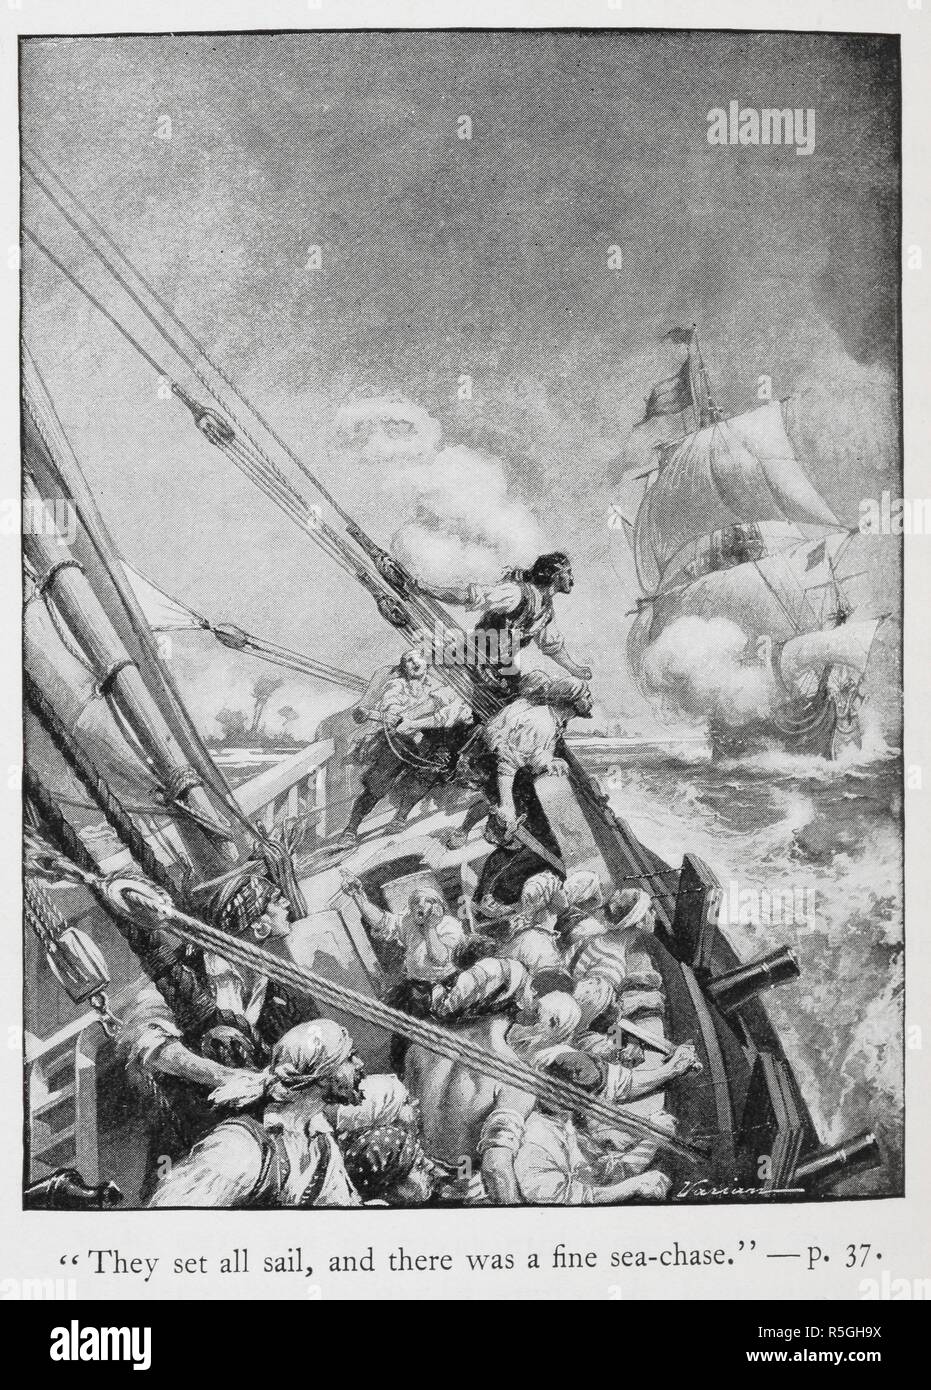 'They set sail, and there was a fine sea-chase'. Illustration showing a pirate ship in pursuit. Buccaneers and Pirates of our Coasts ... New York, 1898. Source: 9770.aa.8, opposite page 37. Author: Stockton, Frank Richard. Varian, G. Stock Photo